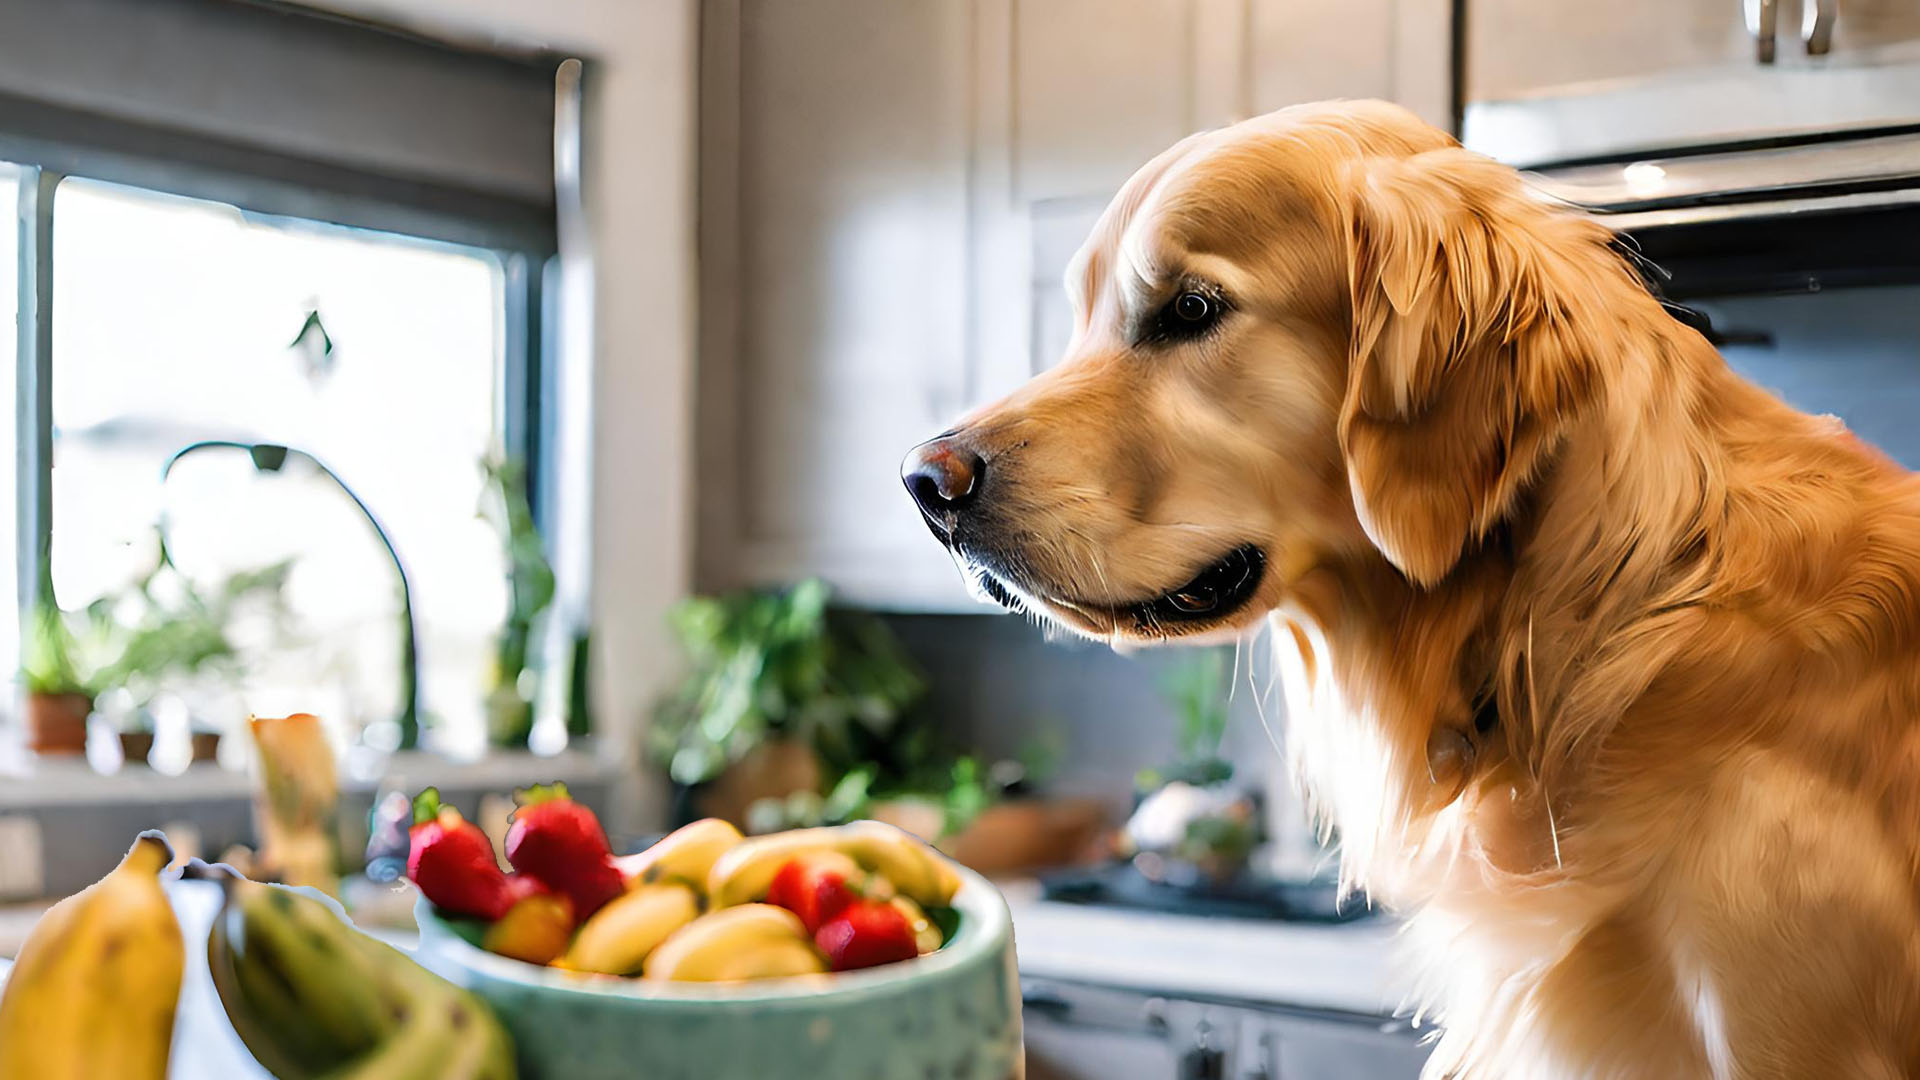 a dog sitting in a kitchen with a bowl of fruit